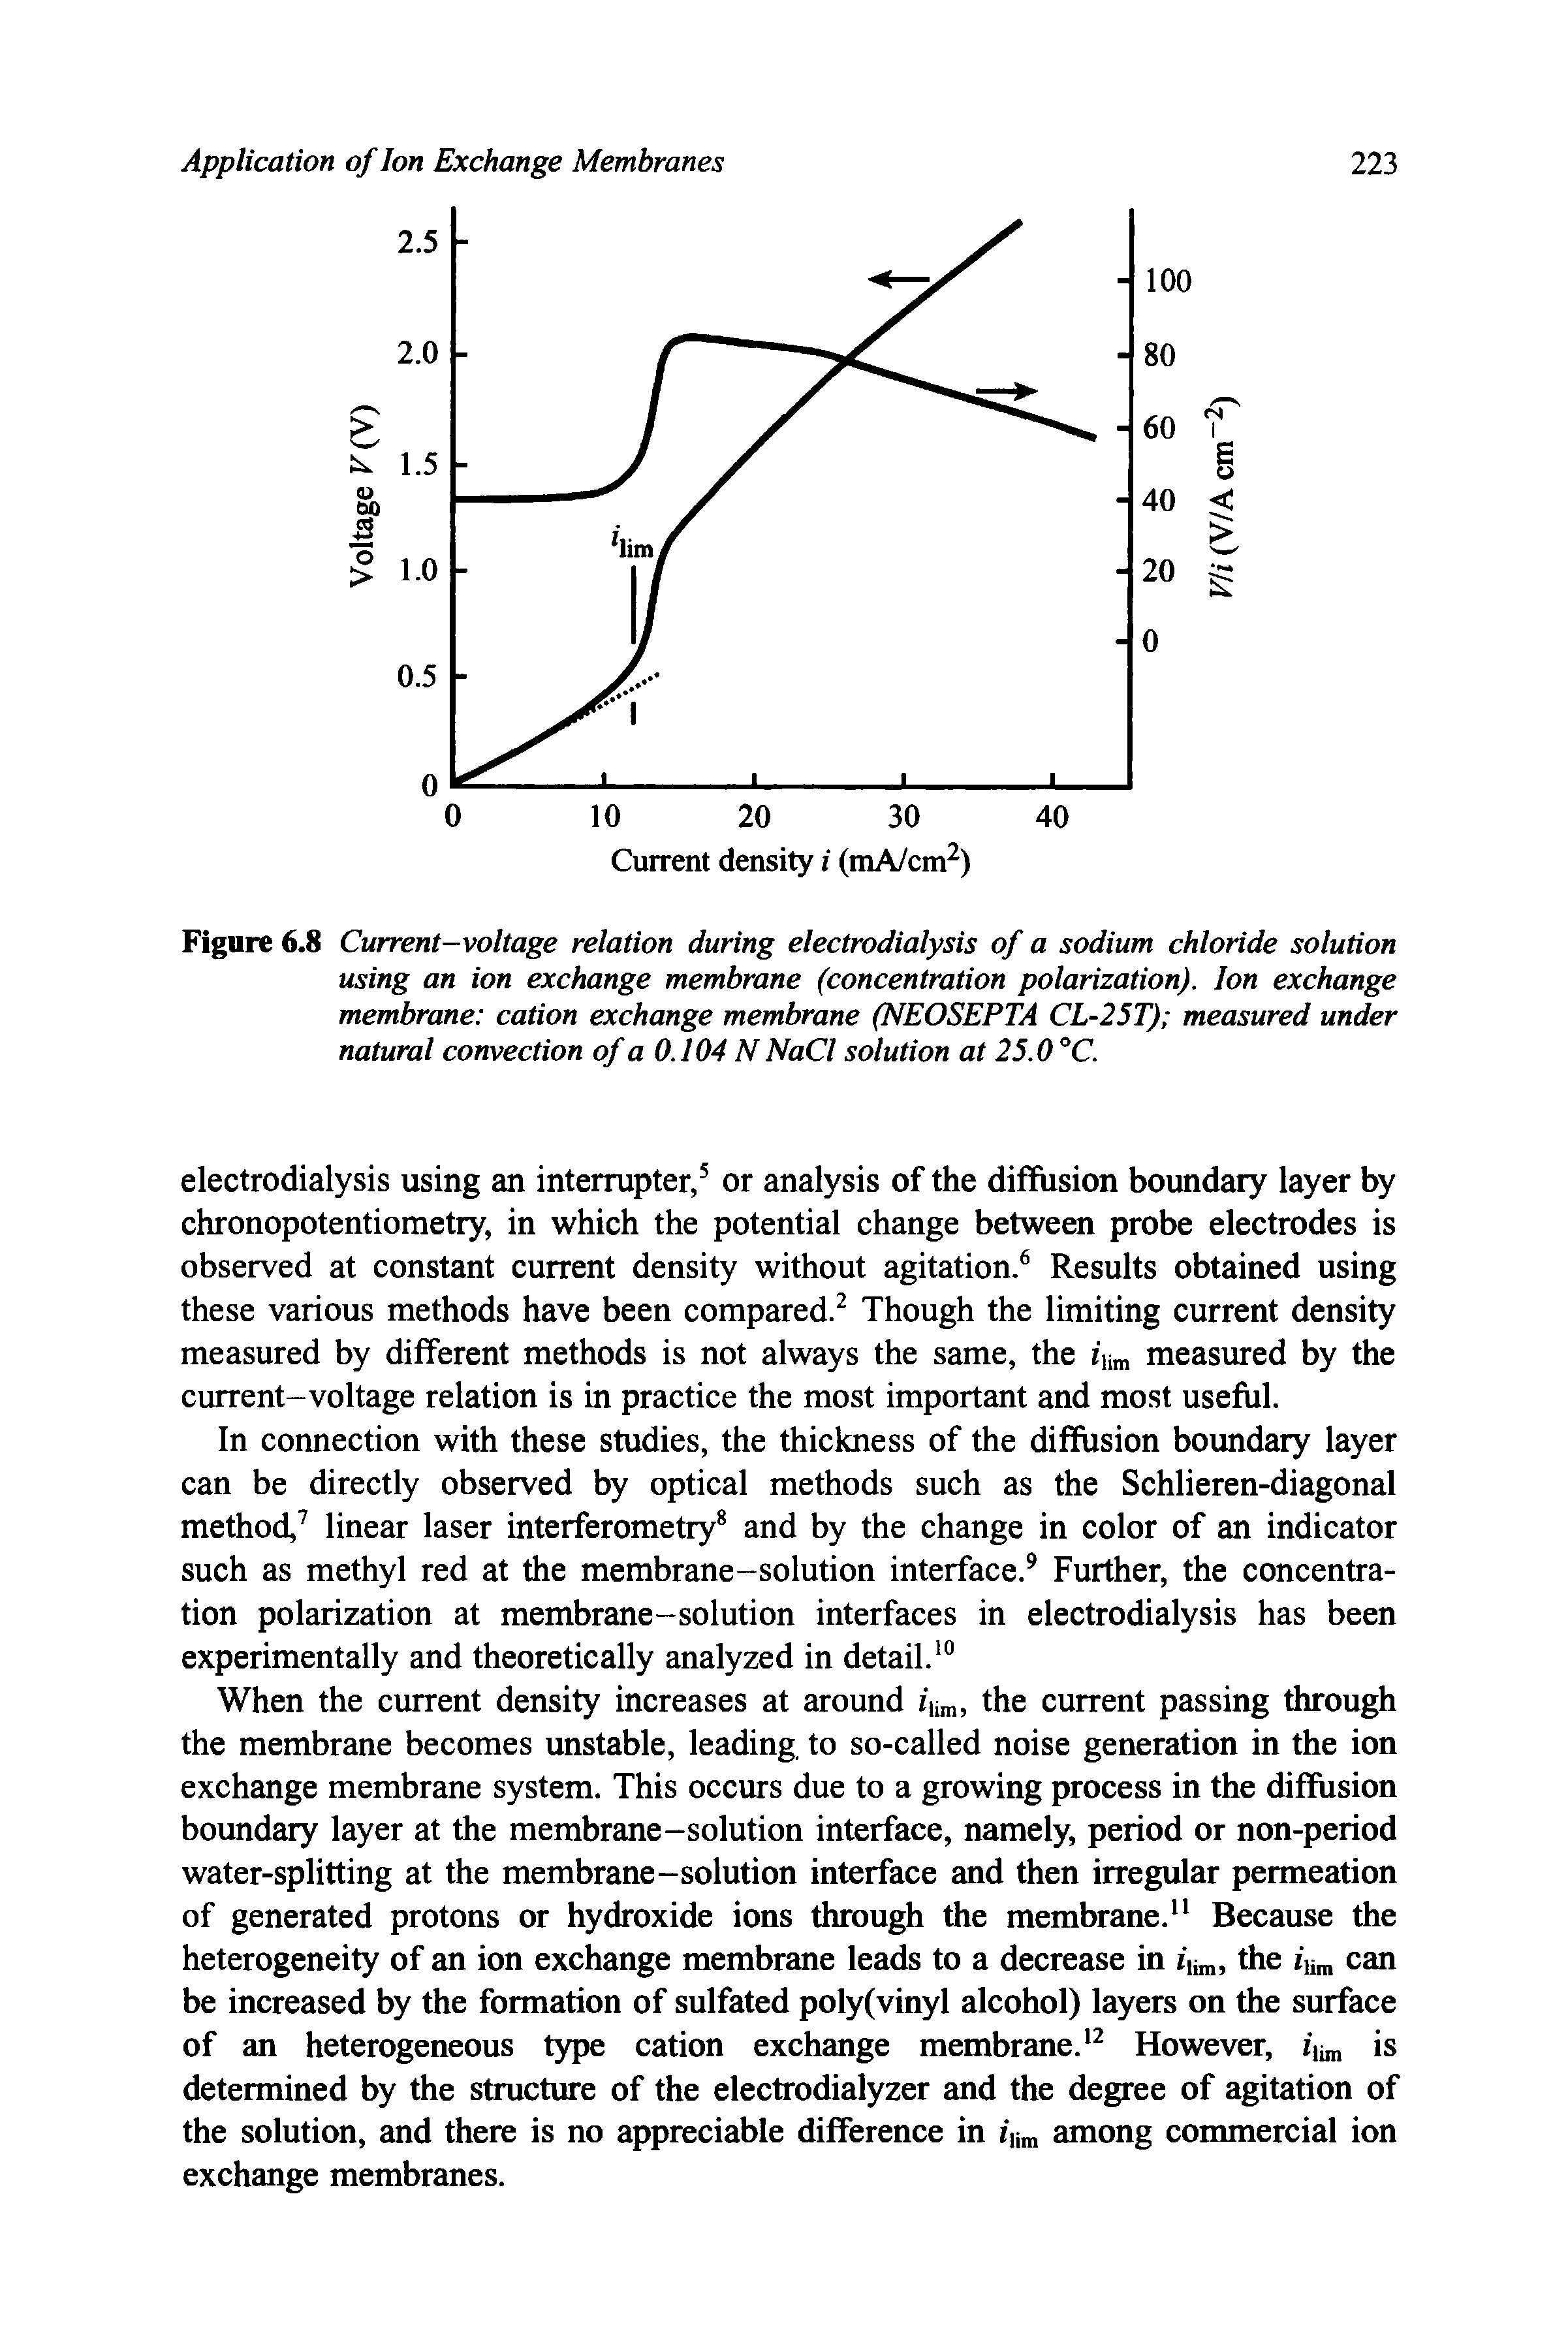 Figure 6.8 Current-voltage relation during electrodialysis of a sodium chloride solution using an ion exchange membrane (concentration polarization). Ion exchange membrane cation exchange membrane (NEOSEPTA CL-25T) measured under natural convection of a 0.104 N NaCl solution at 25.0 °C.